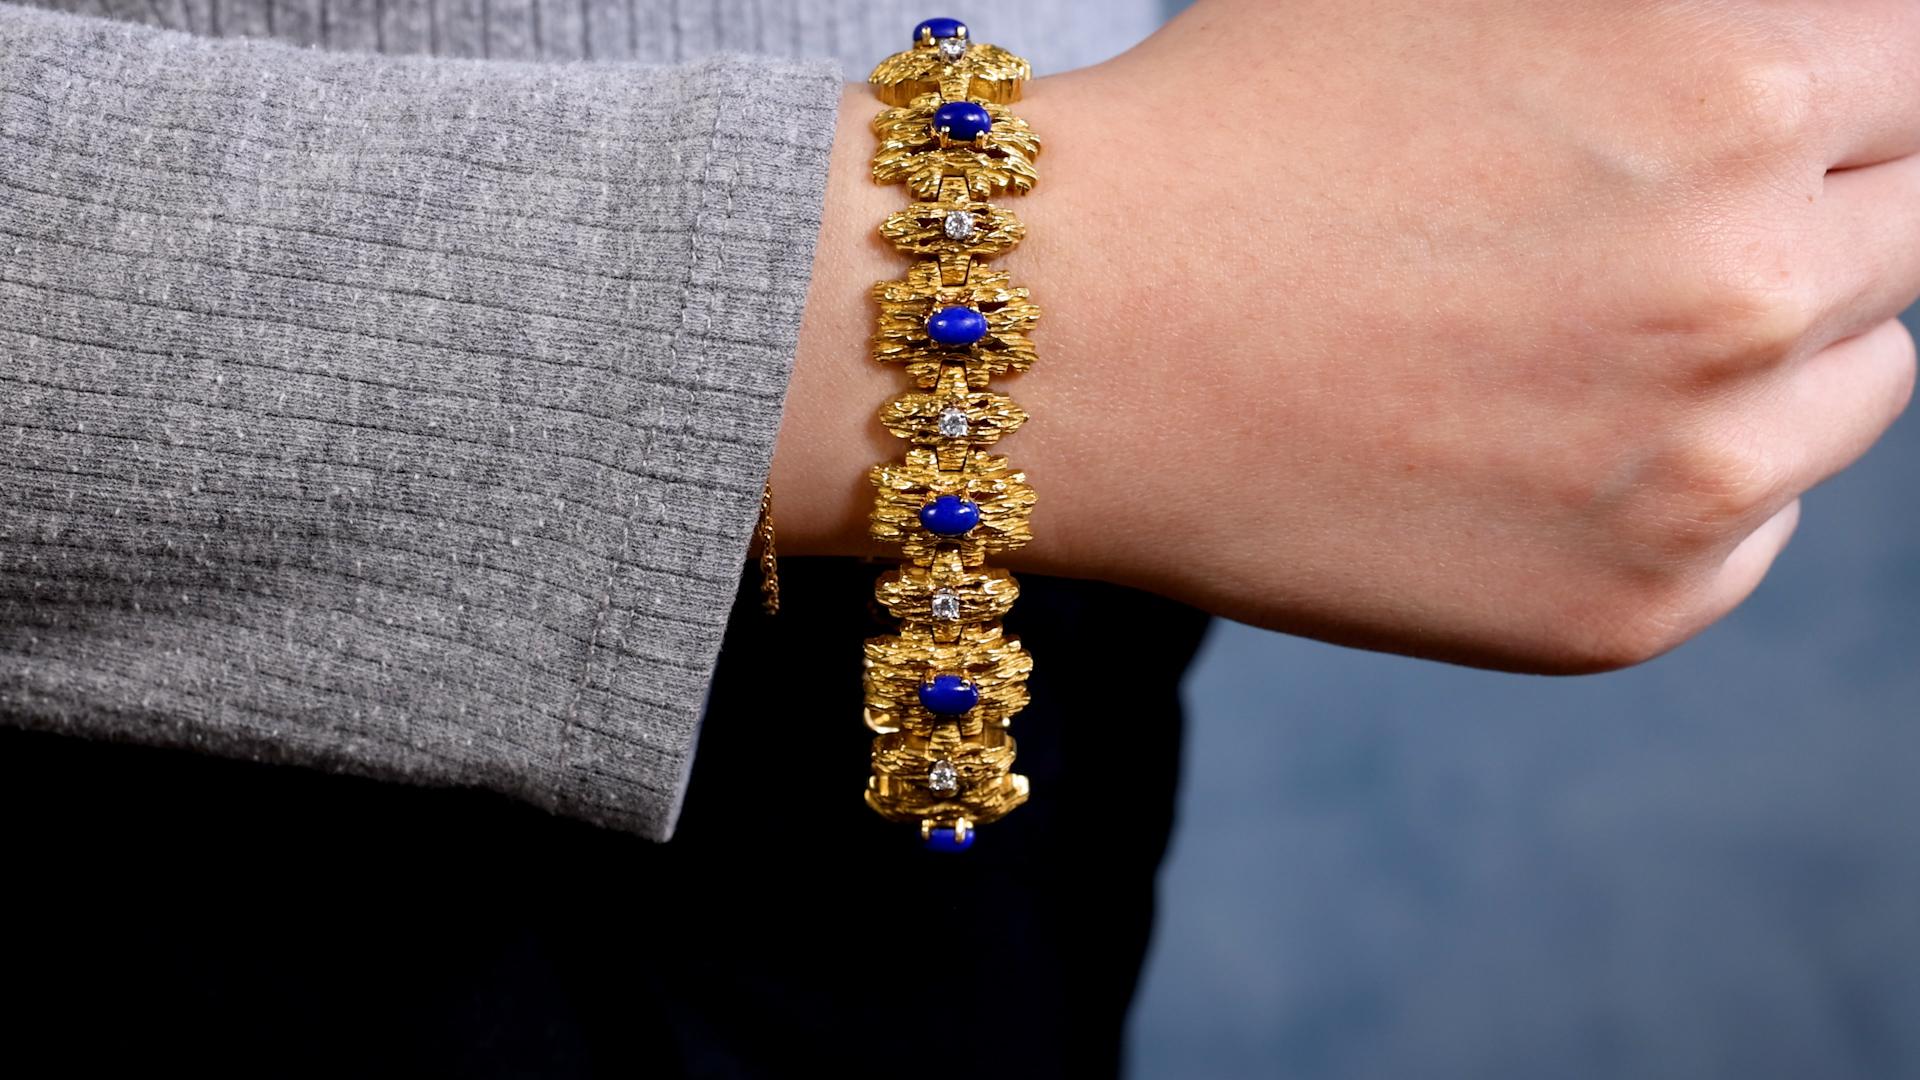 One Vintage Diamond and Lapis Lazuli 18k Yellow Gold Modernist Link Bracelet. Featuring 10 cabochon cut lapis lazuli with a total weight of approximately 5.00 carats. Accented by 10 round brilliant cut diamonds with a total weight of approximately